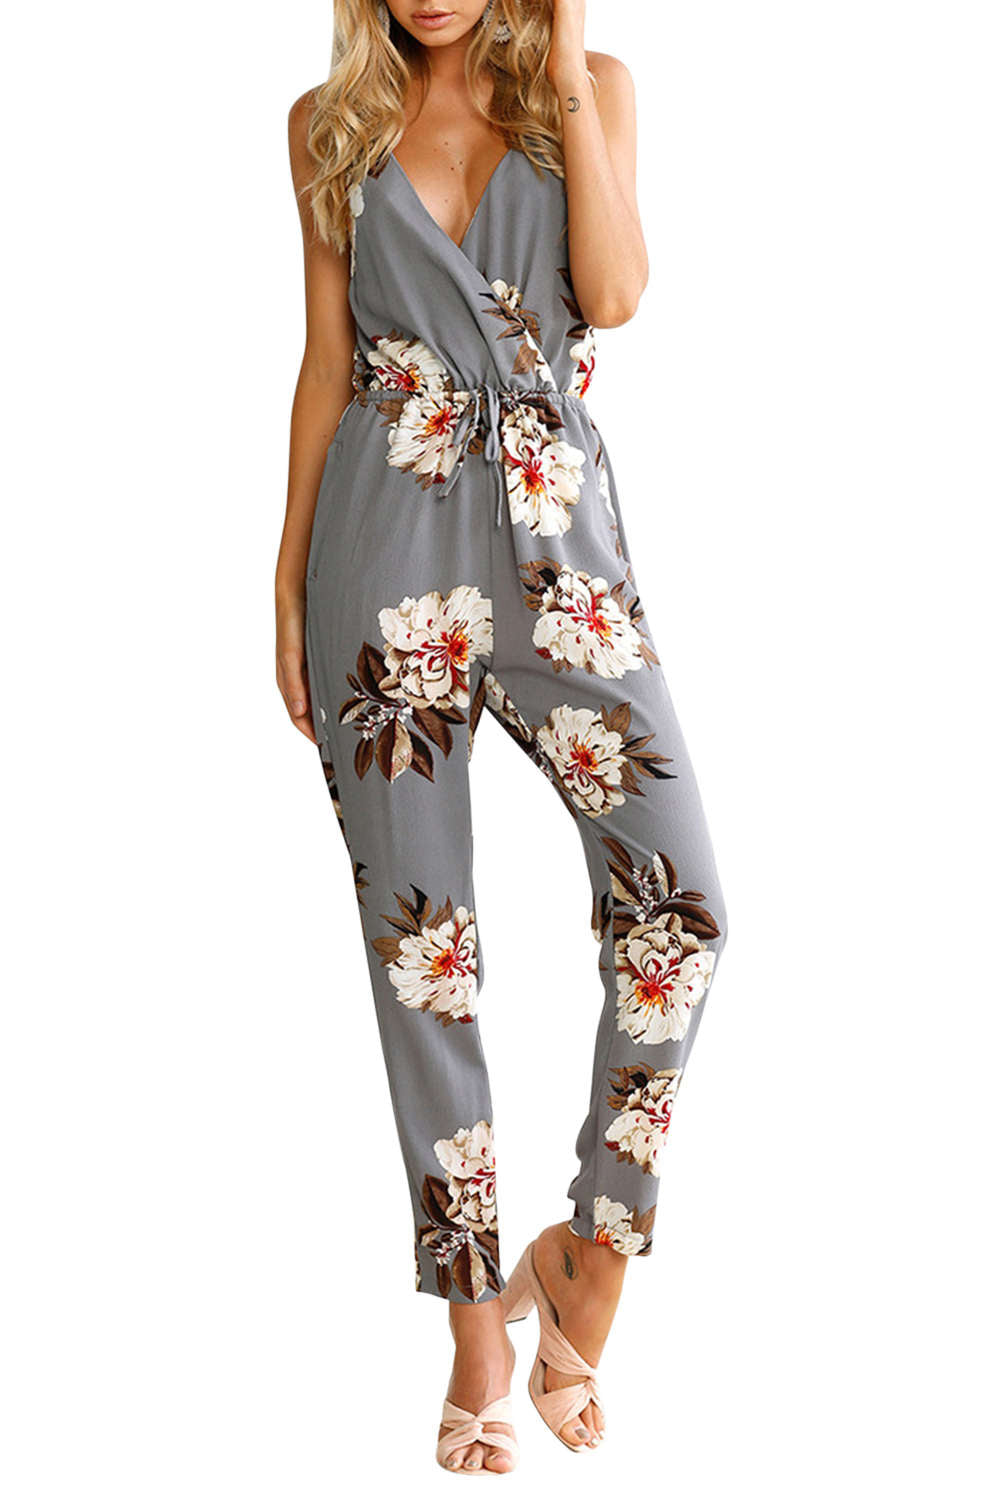 Iyasson Sleeveless Backless Floral Printed Jumpsuit